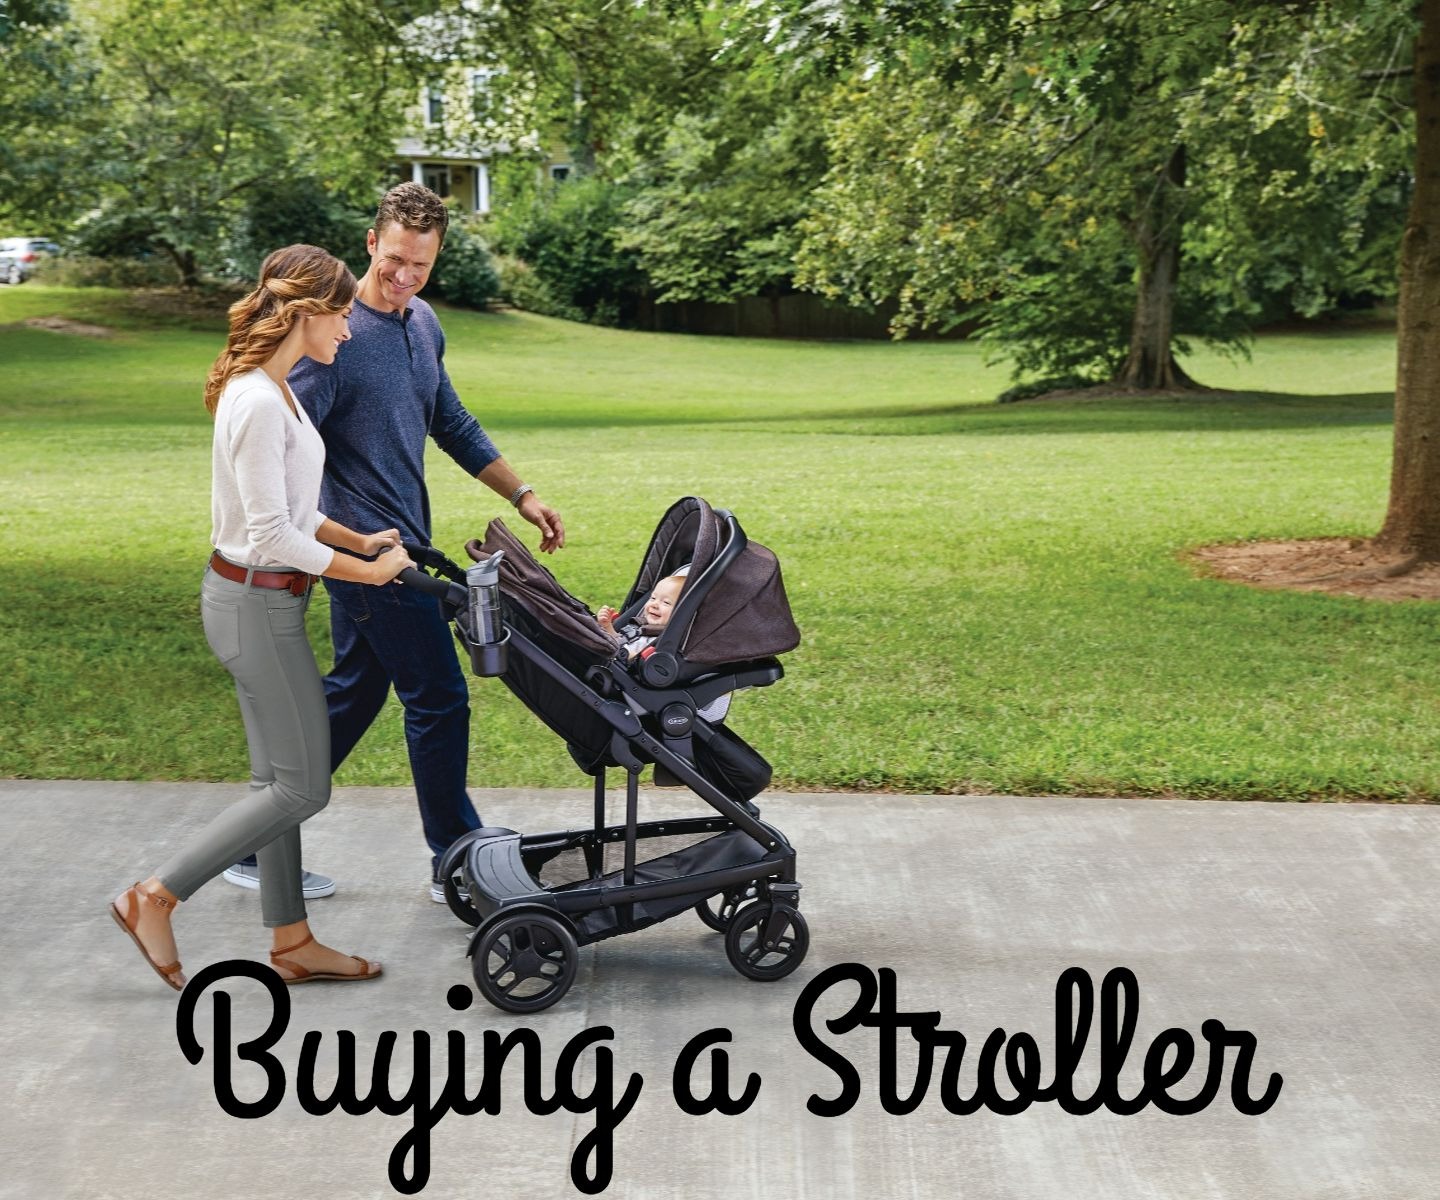 5 Things to Consider When Buying a Stroller